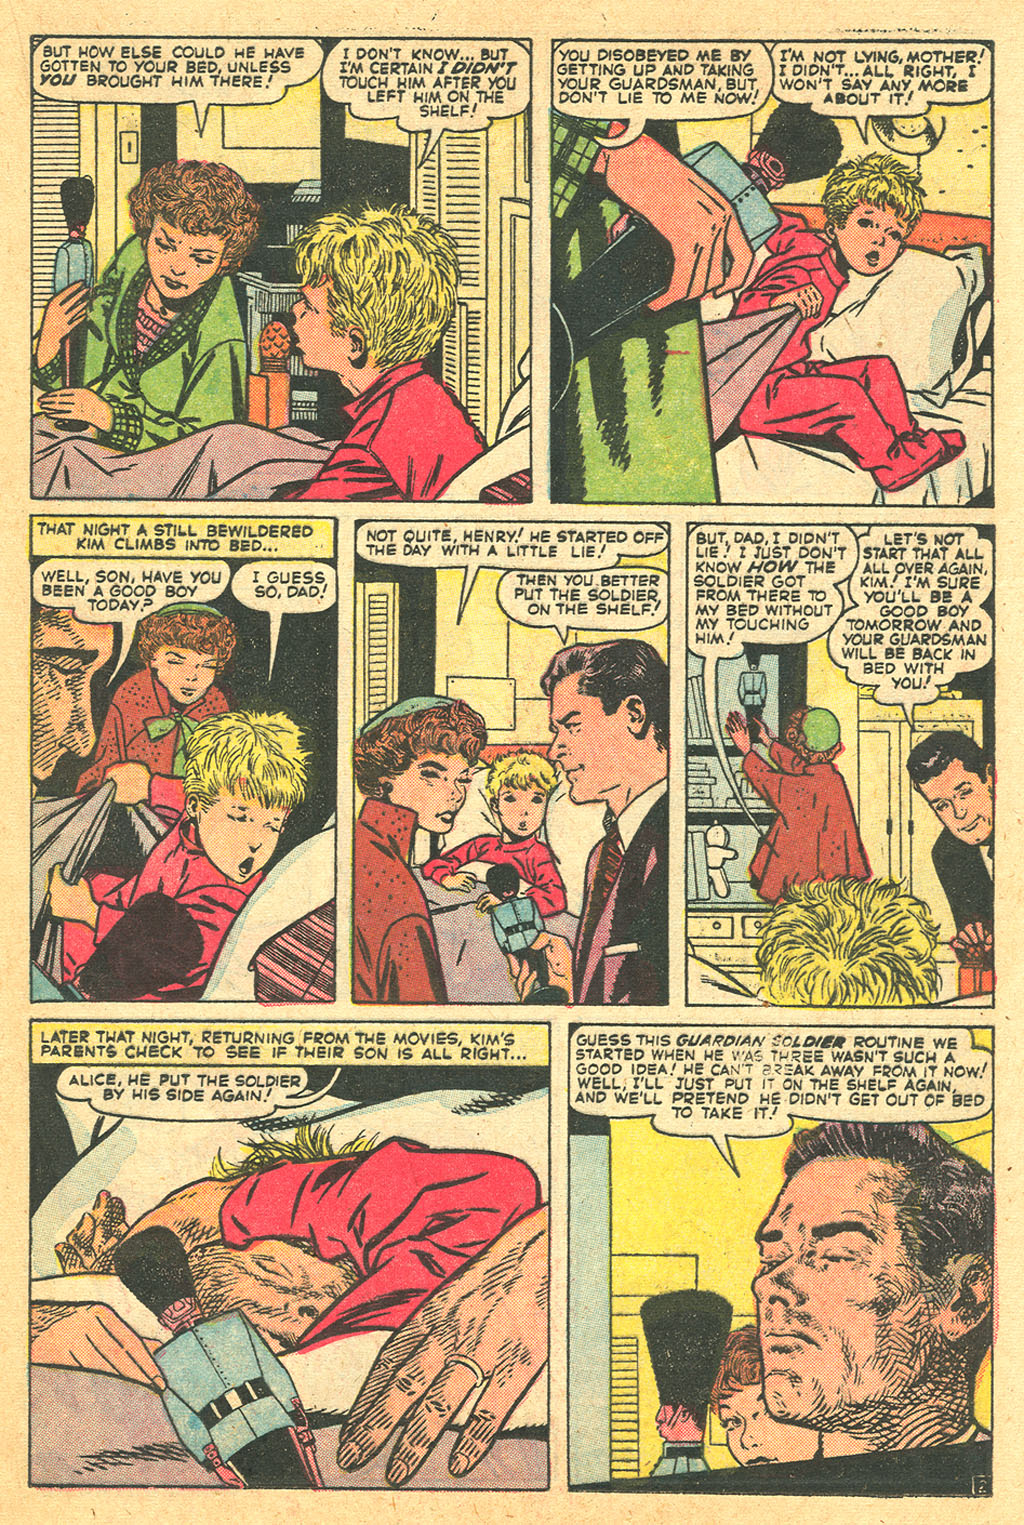 Marvel Tales (1949) 139 Page 16